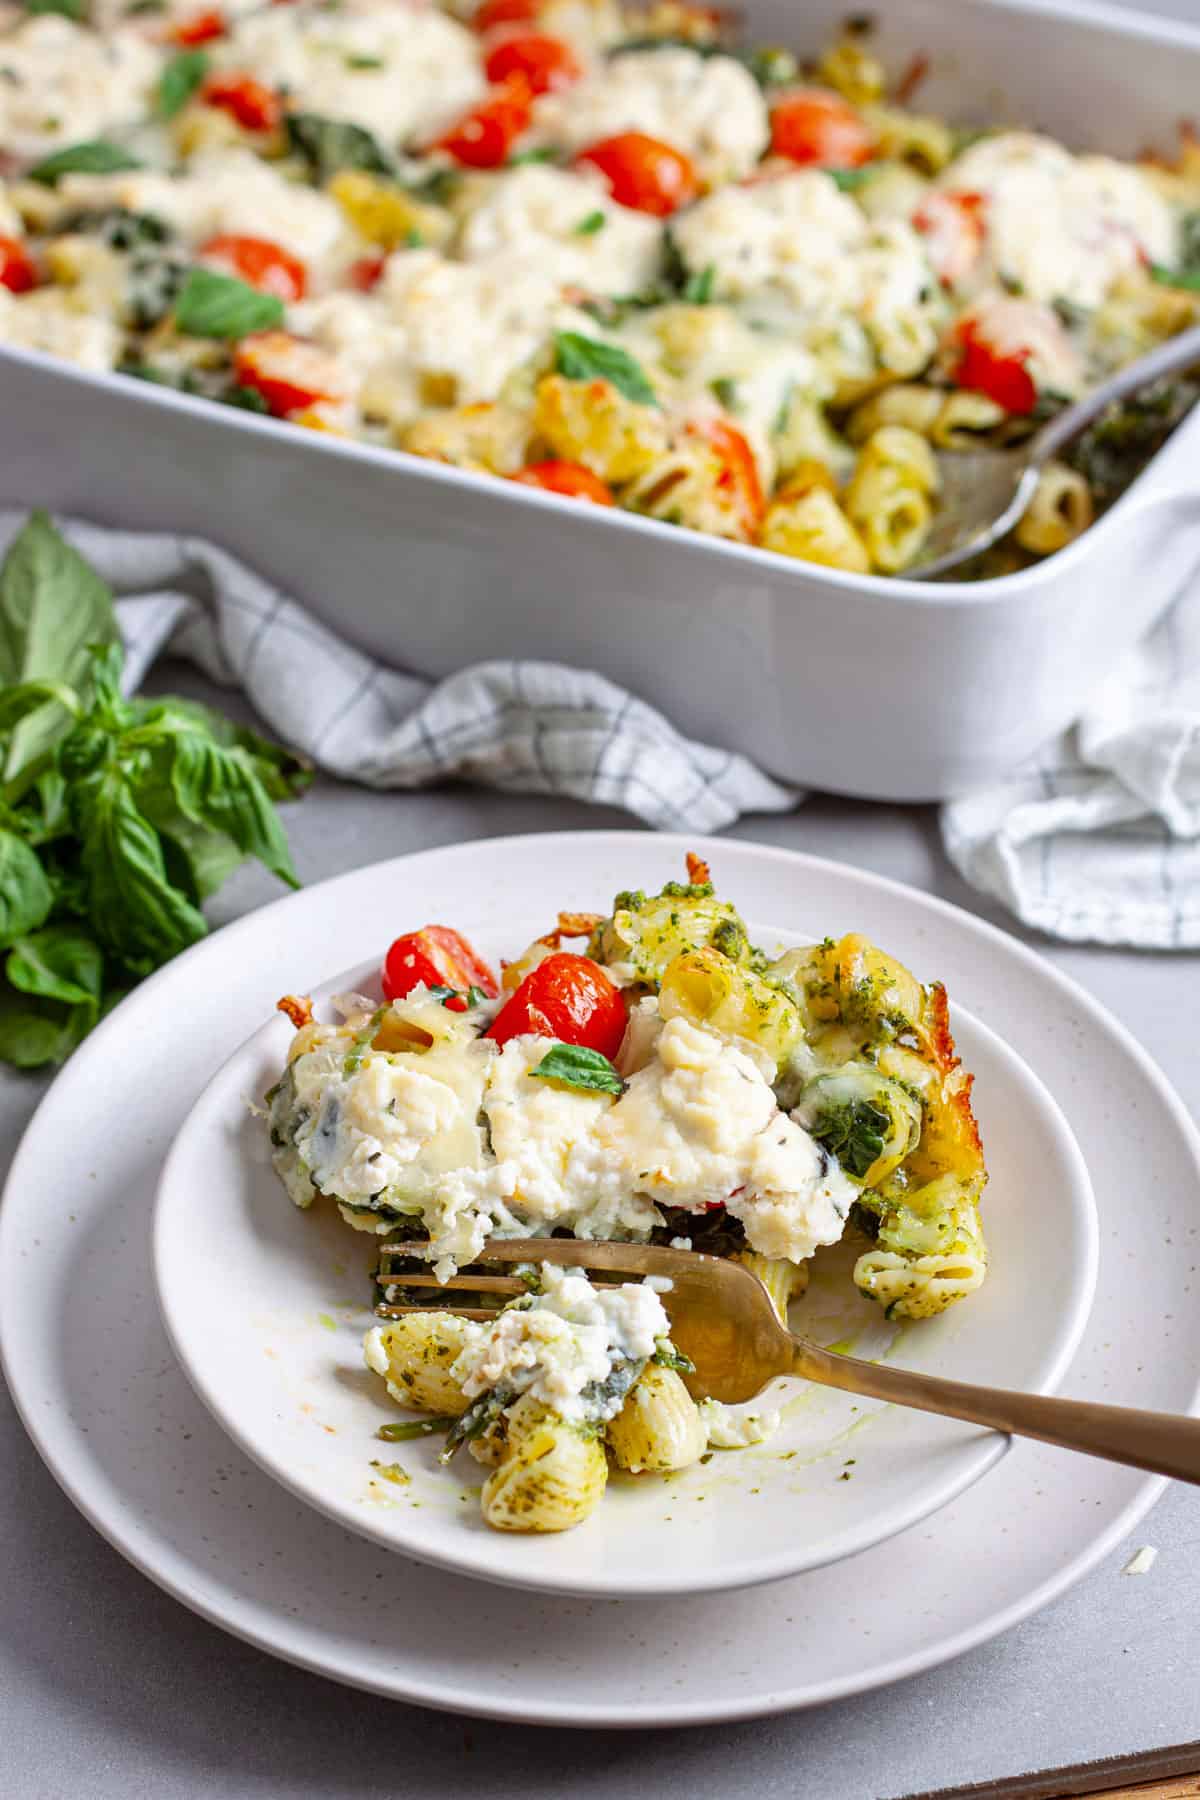 A serving of ricotta pesto pasta on a plate with a casserole dish of the baked pasta in the background.